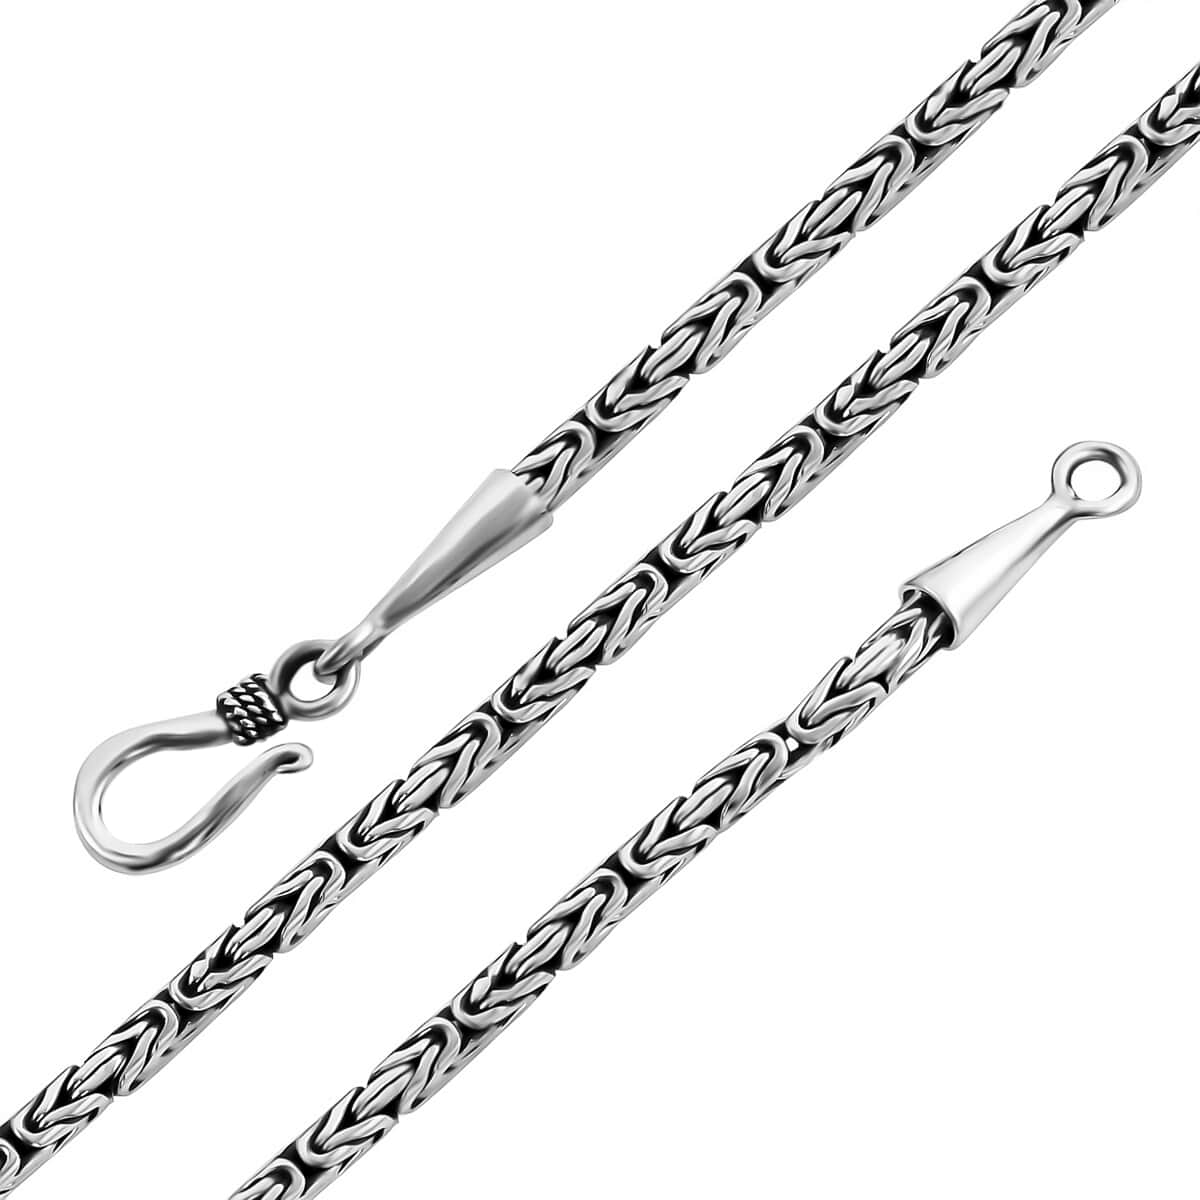 Bali Legacy Sterling Silver Borobudur Chain Necklace, Sterling Silver Necklace, Silver Jewelry, 22 Inch Chain Necklace 2.5mm 22.40 Grams image number 3